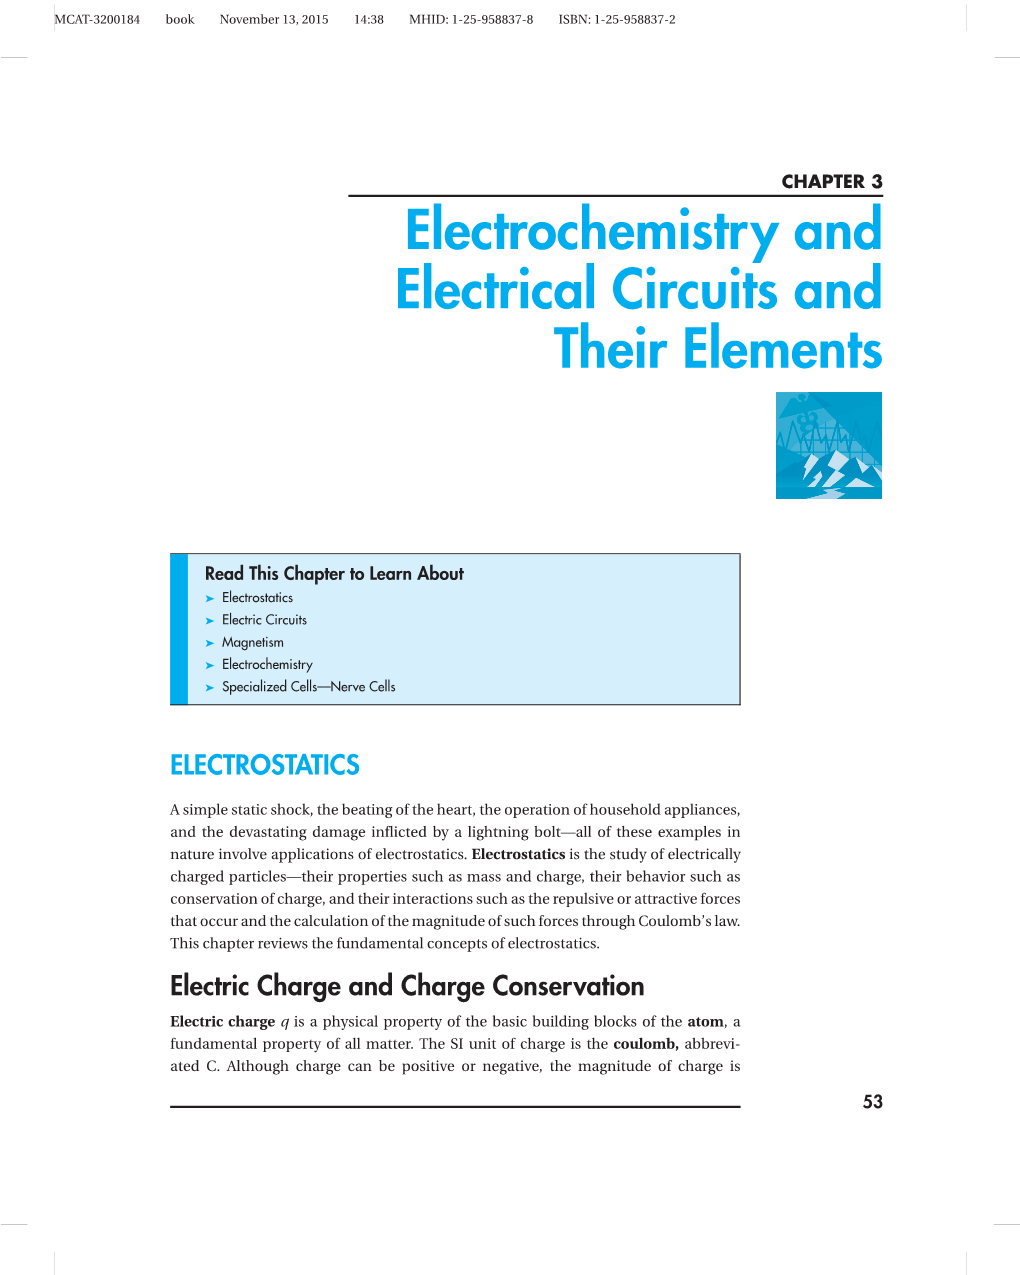 Electrochemistry and Electrical Circuits and Their Elements